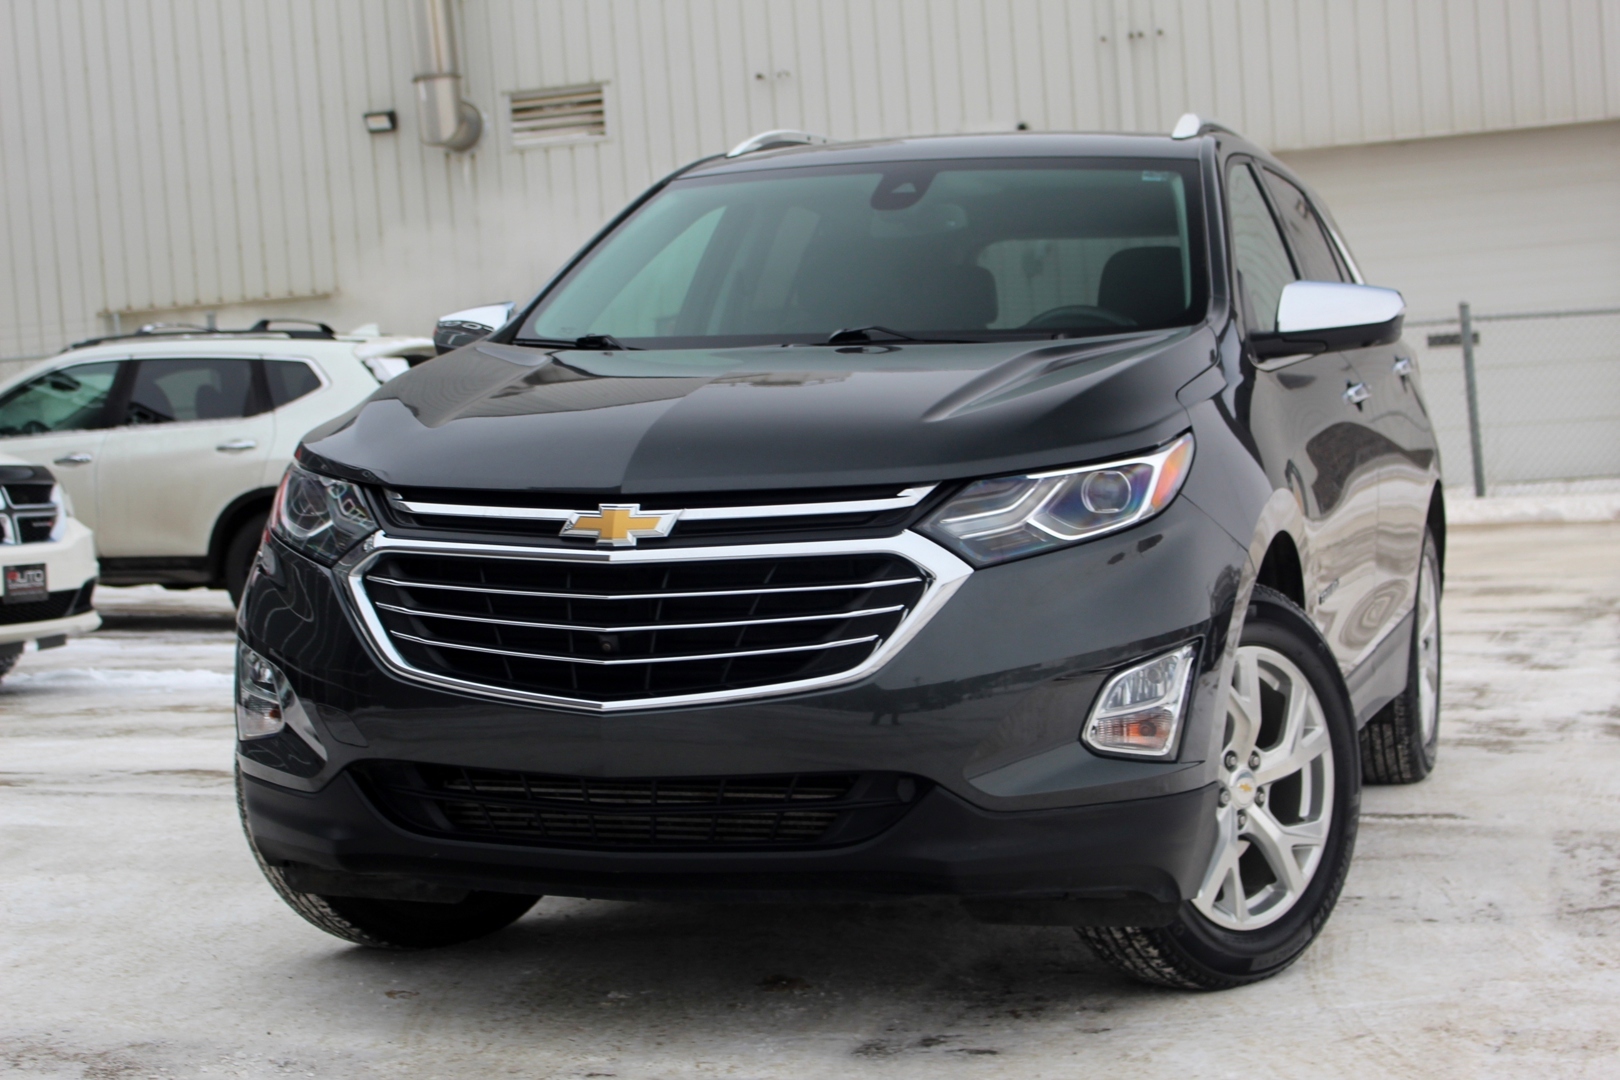 2019 Chevrolet Equinox Premier - AWD - COOLED SEATS - ACCIDENT FREE